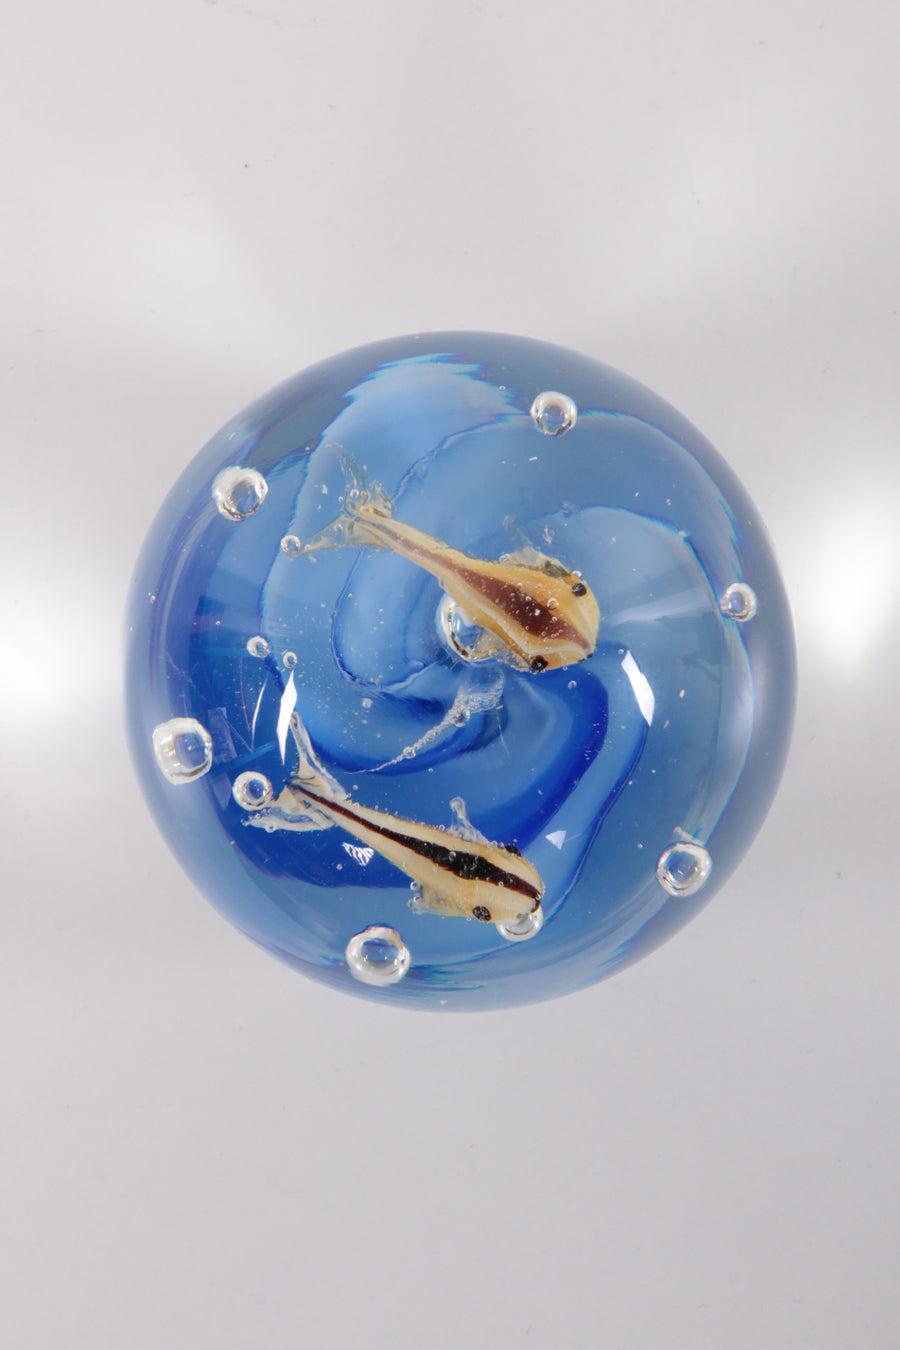 Glass Aquarium Paperweight with Fishes

Additional information: 
Dimensions: 7 W x 7 D x 7 H cm 
Period of Time: 1960
Condition: Good
